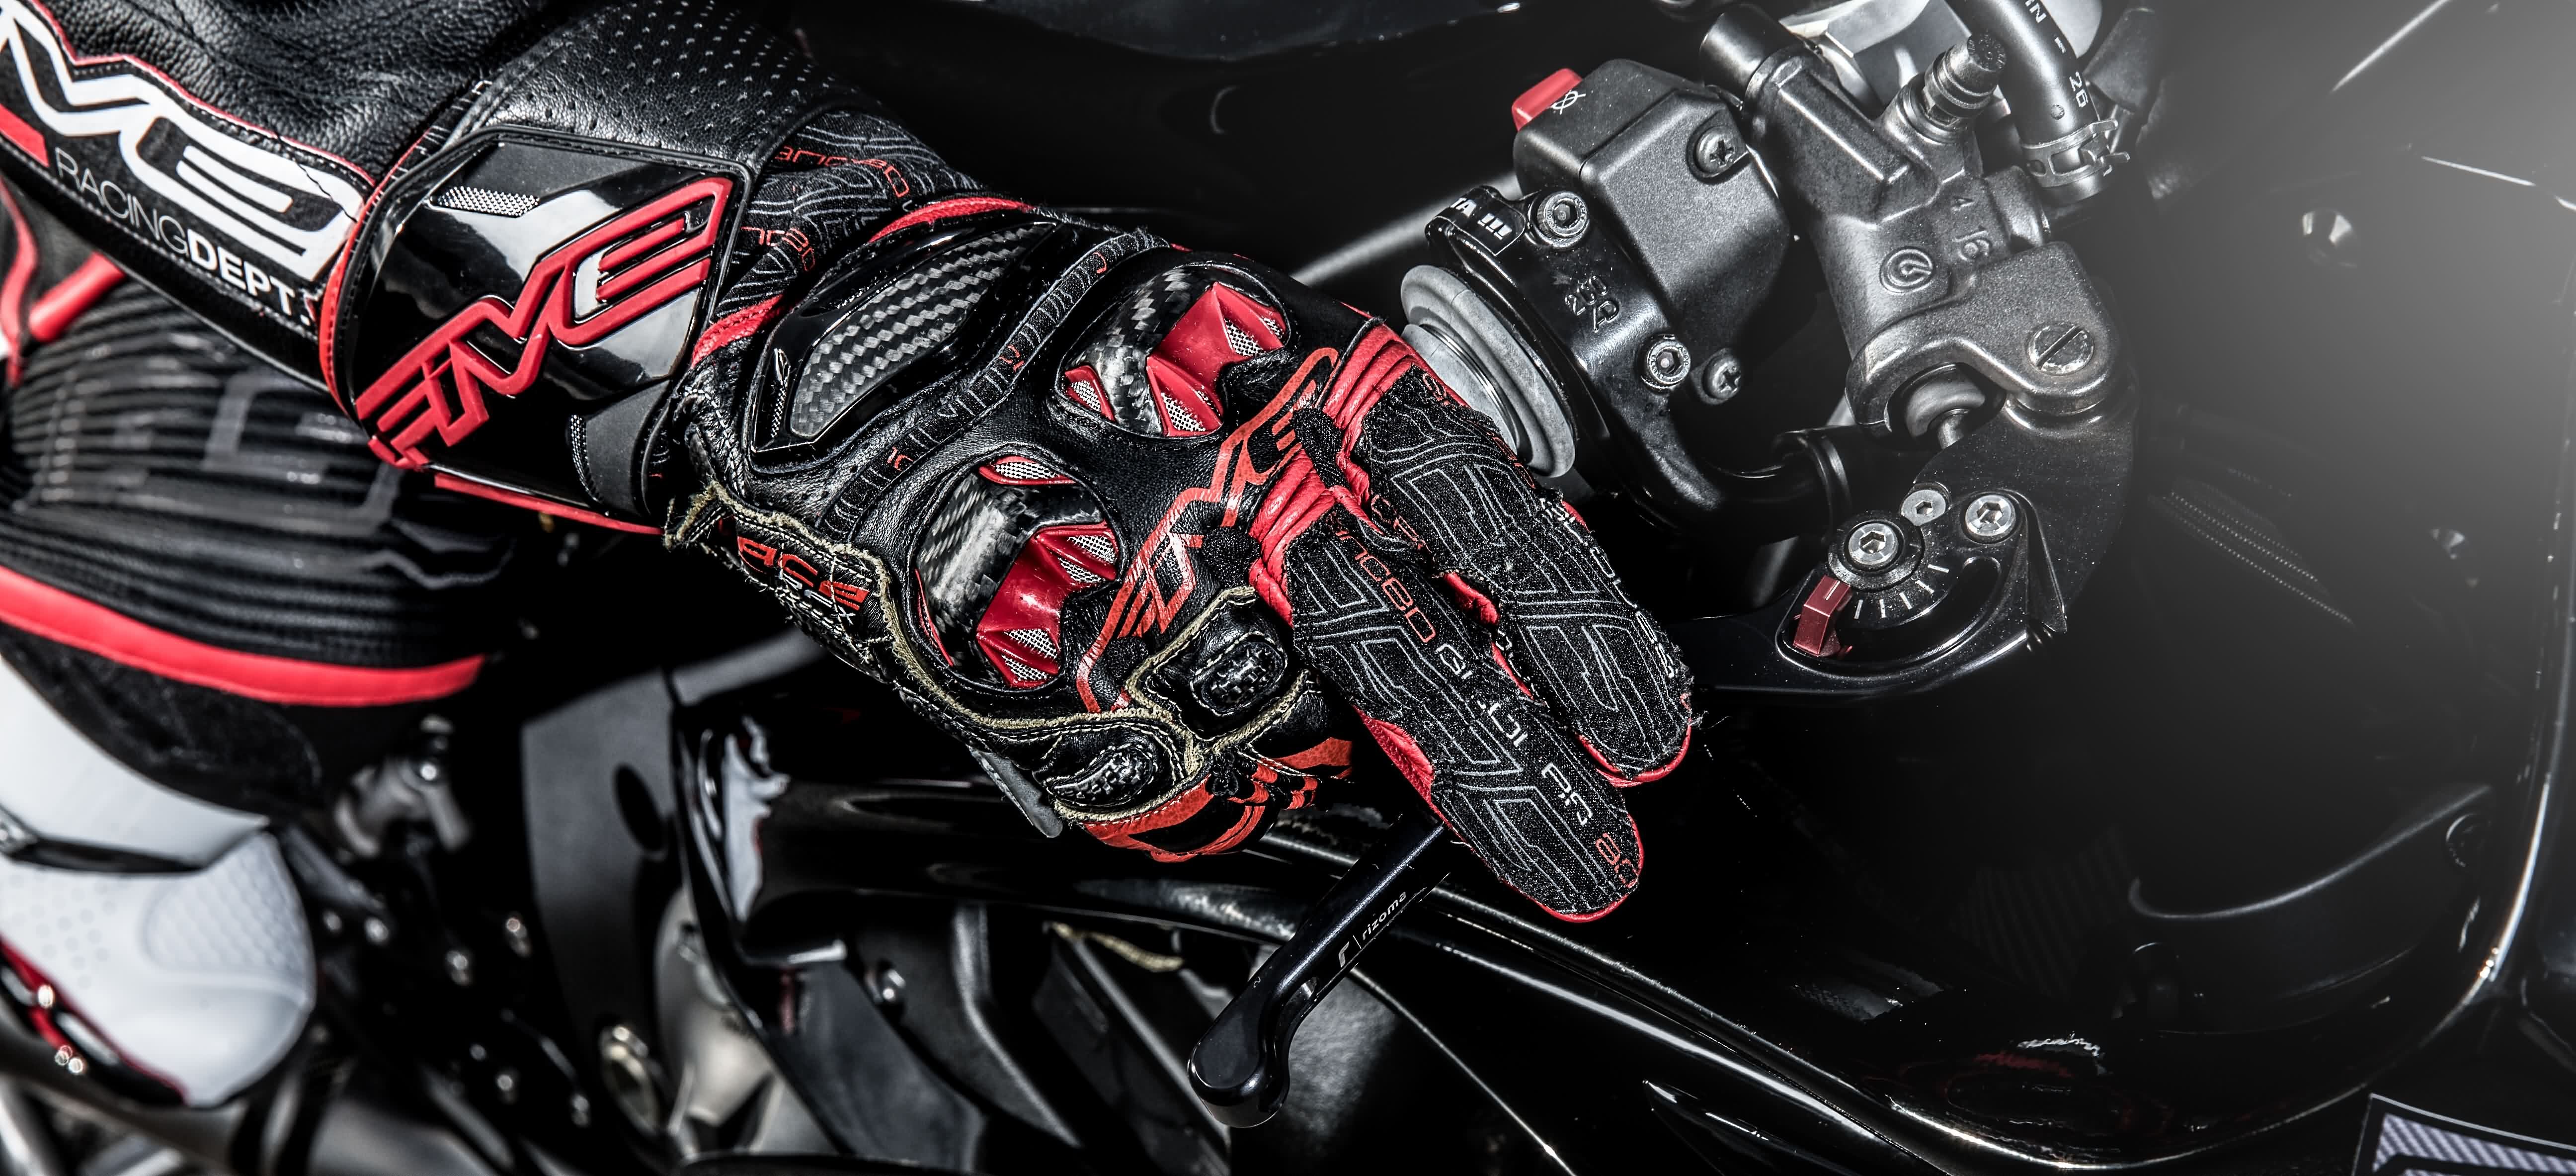 Five Advanced Motorcycle Street Gloves Sizing Guide